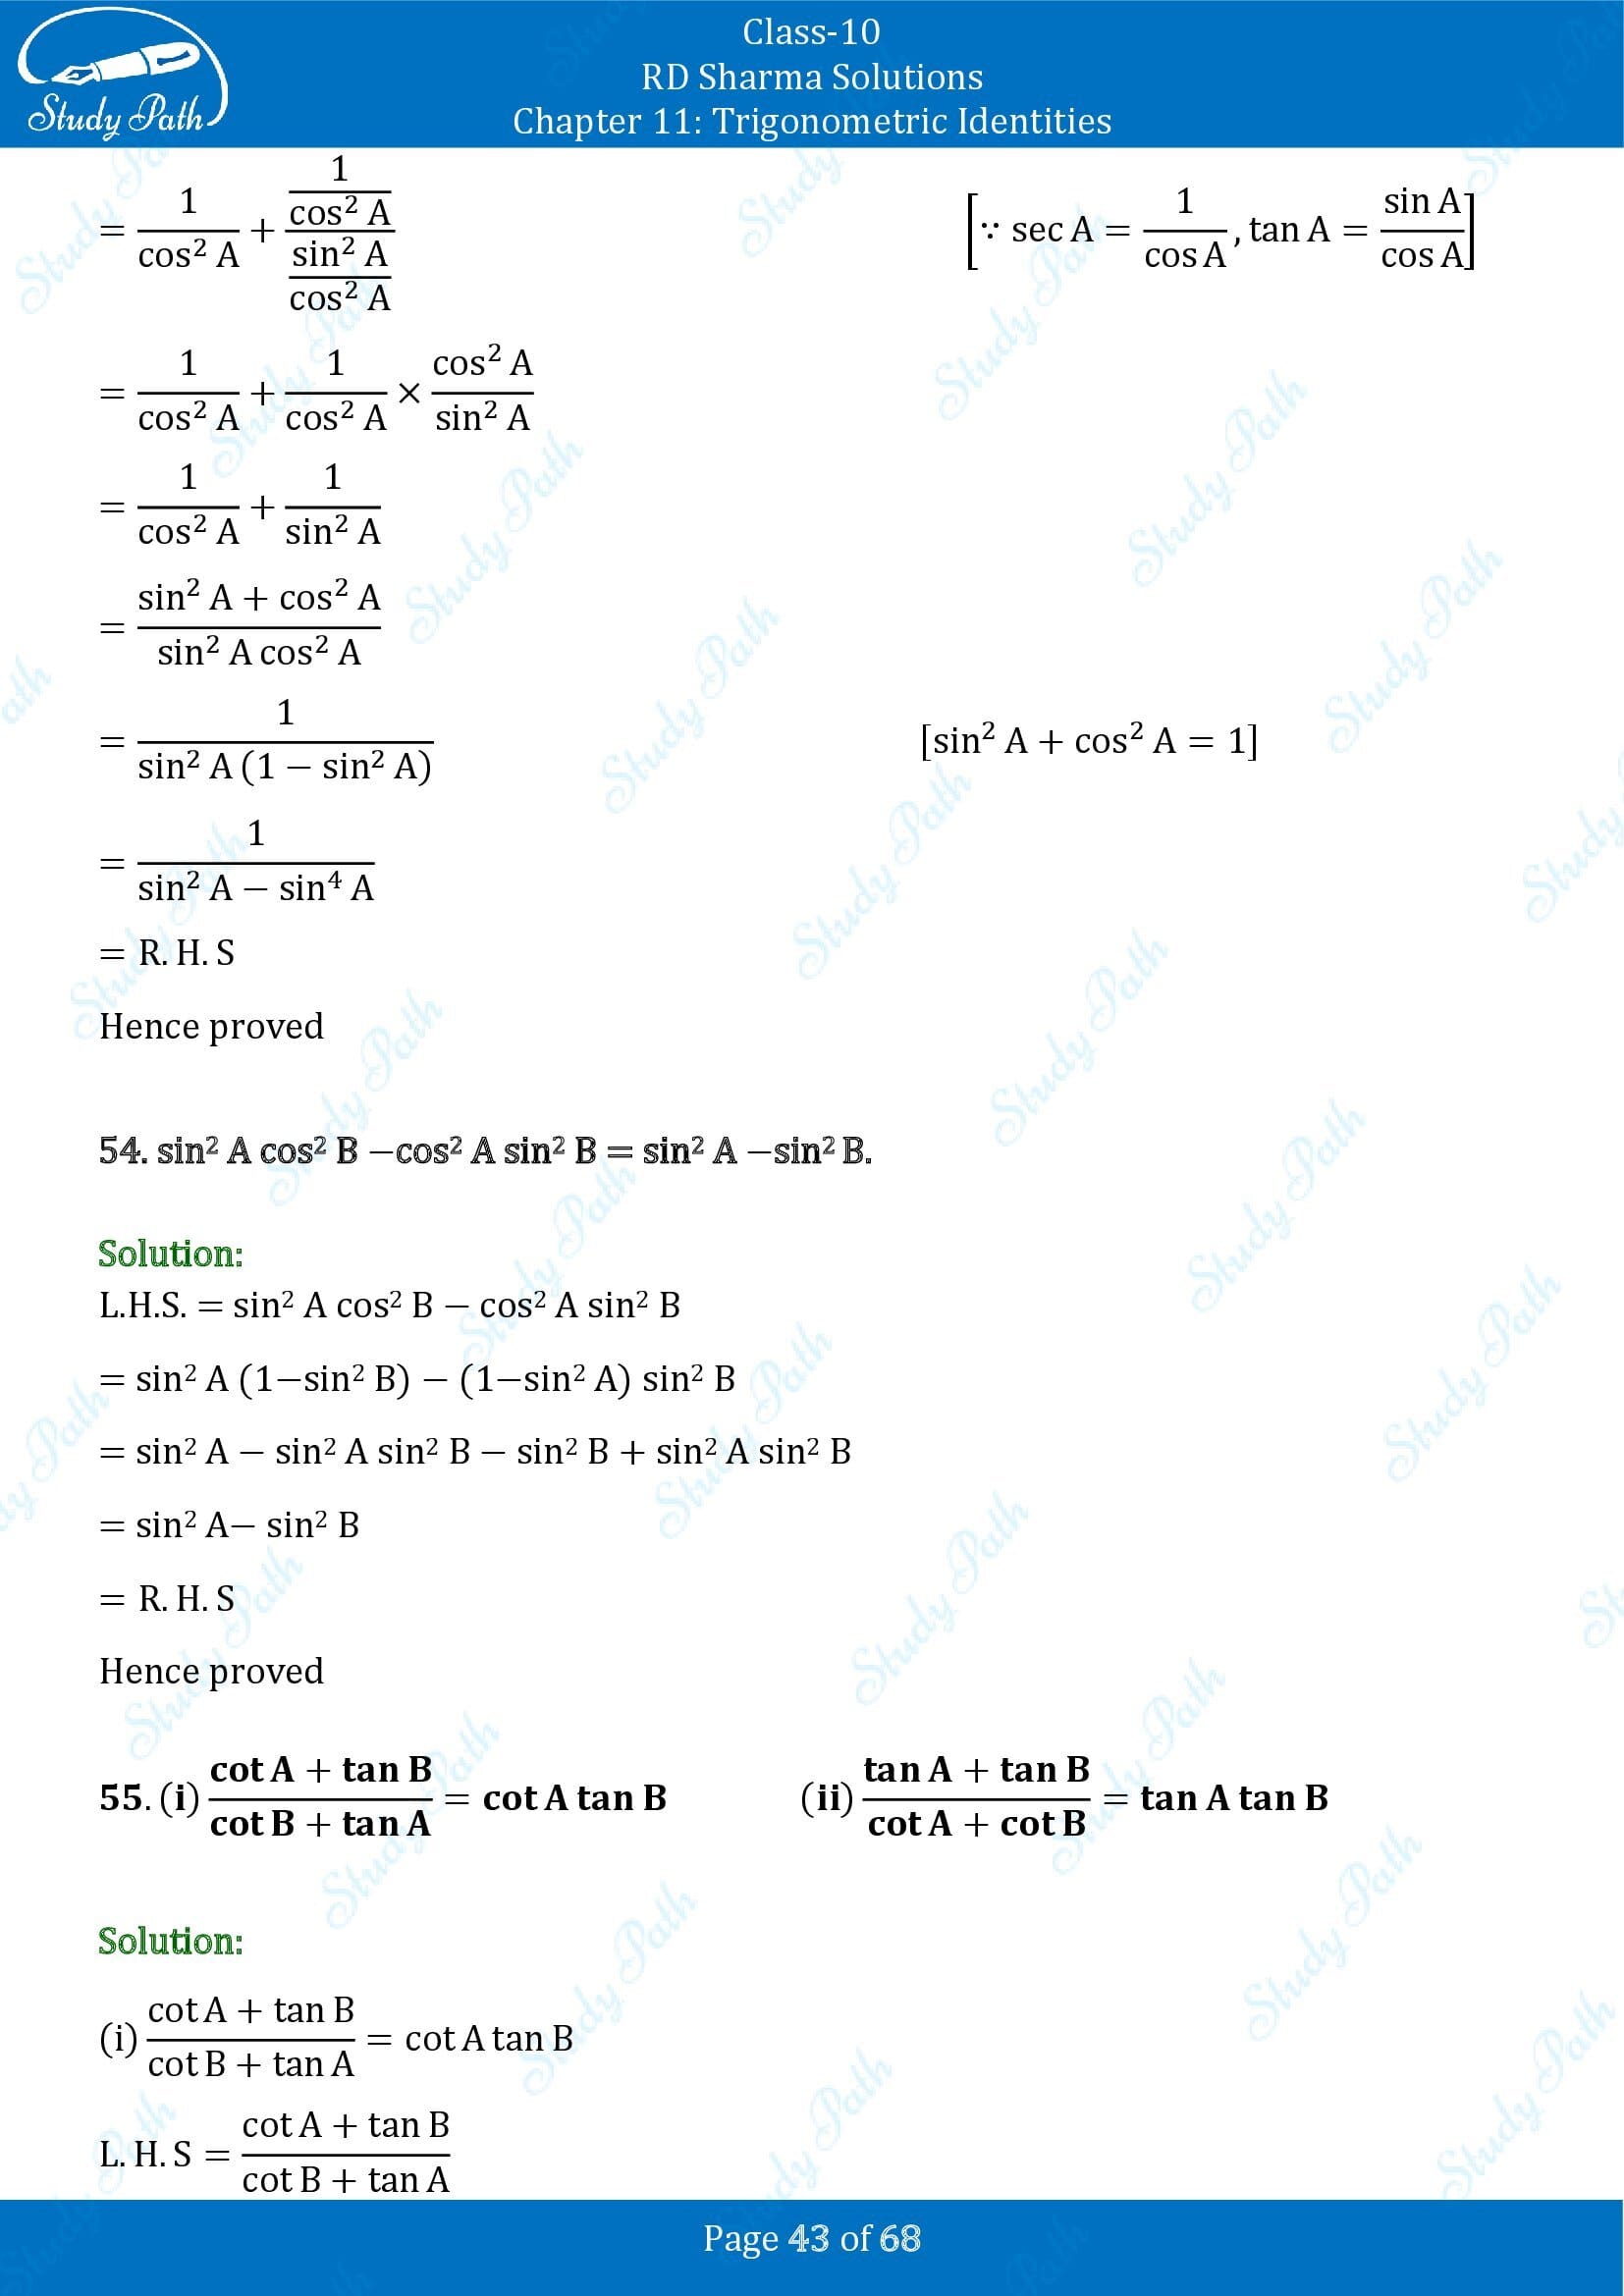 RD Sharma Solutions Class 10 Chapter 11 Trigonometric Identities Exercise 11.1 00043